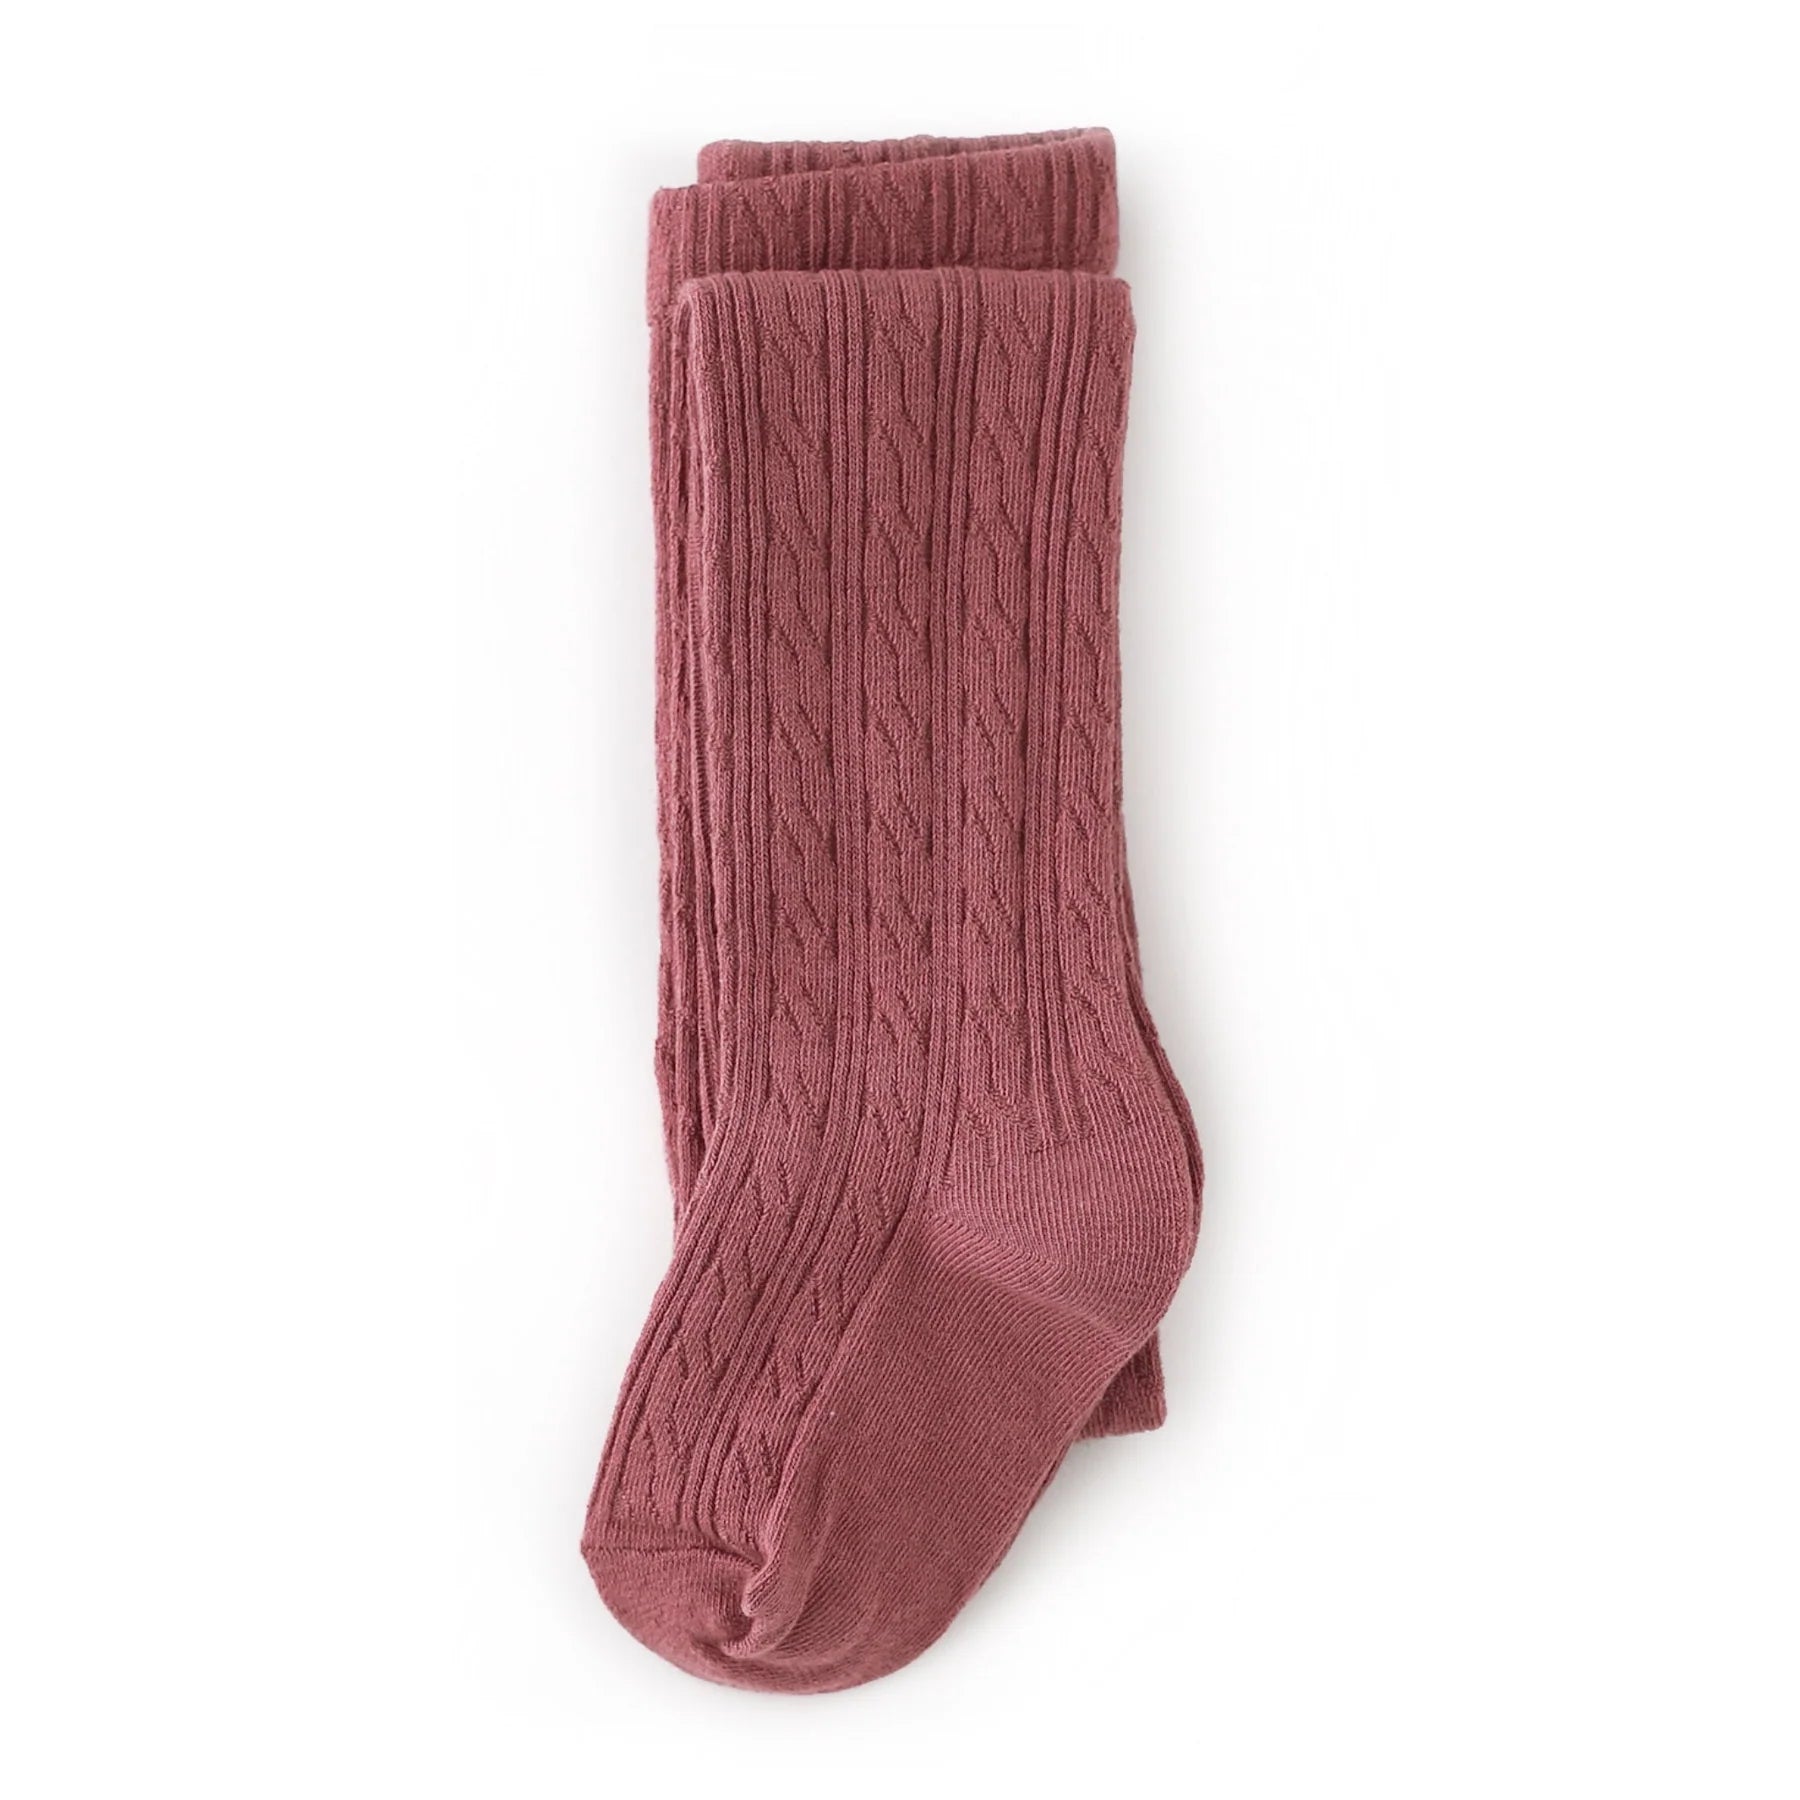 The Little Stocking Co - Cable Knit Tights - Mauve Rose